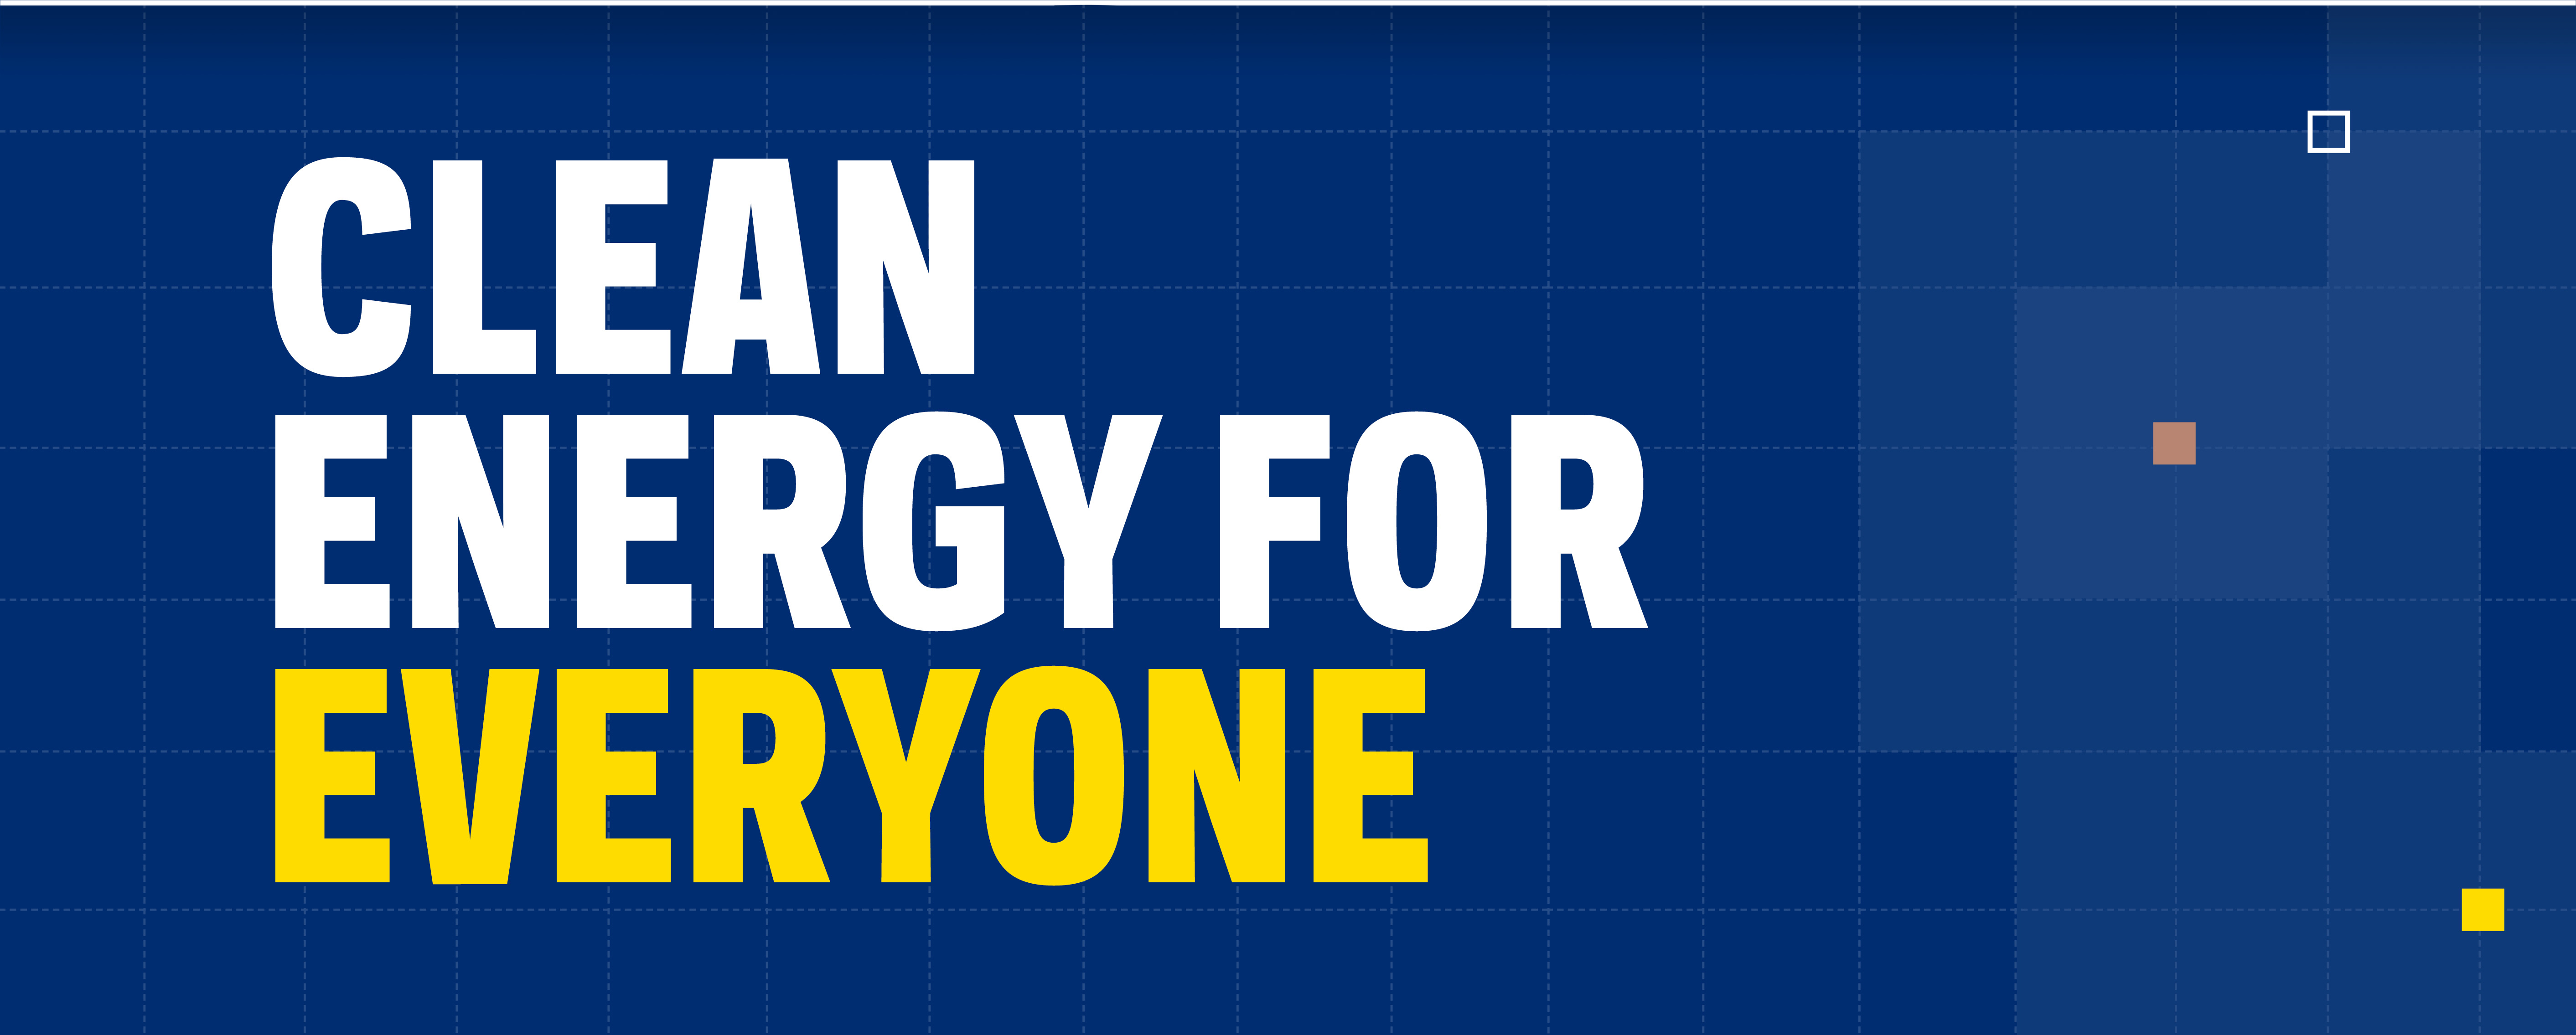 Clean energy for everyone.